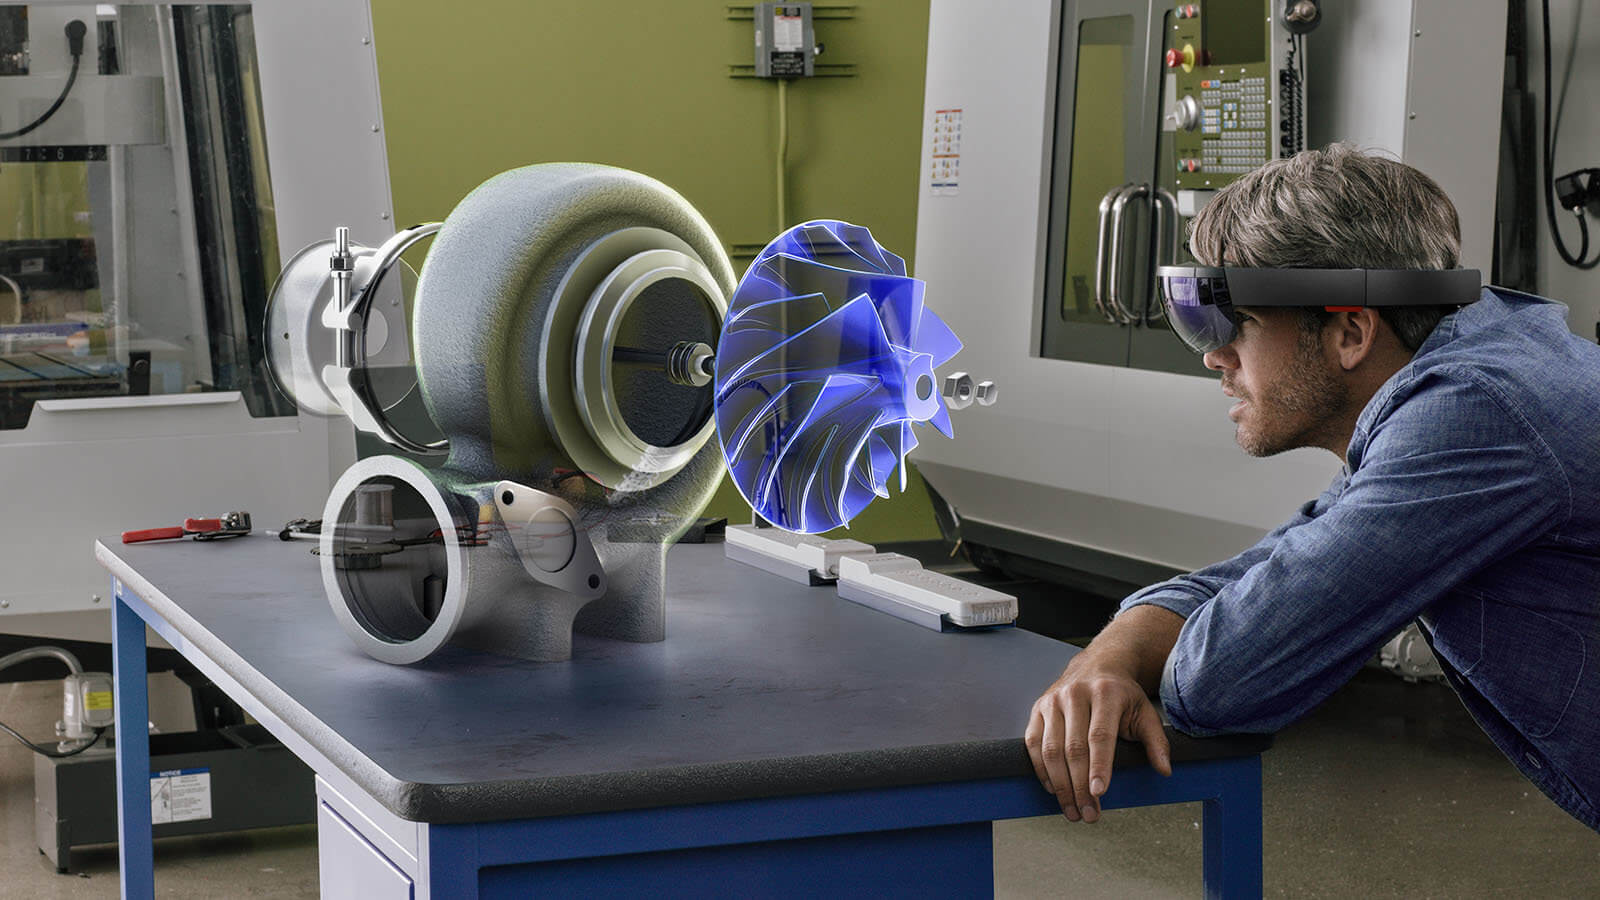 Microsoft employees protest: HoloLens for good, not war